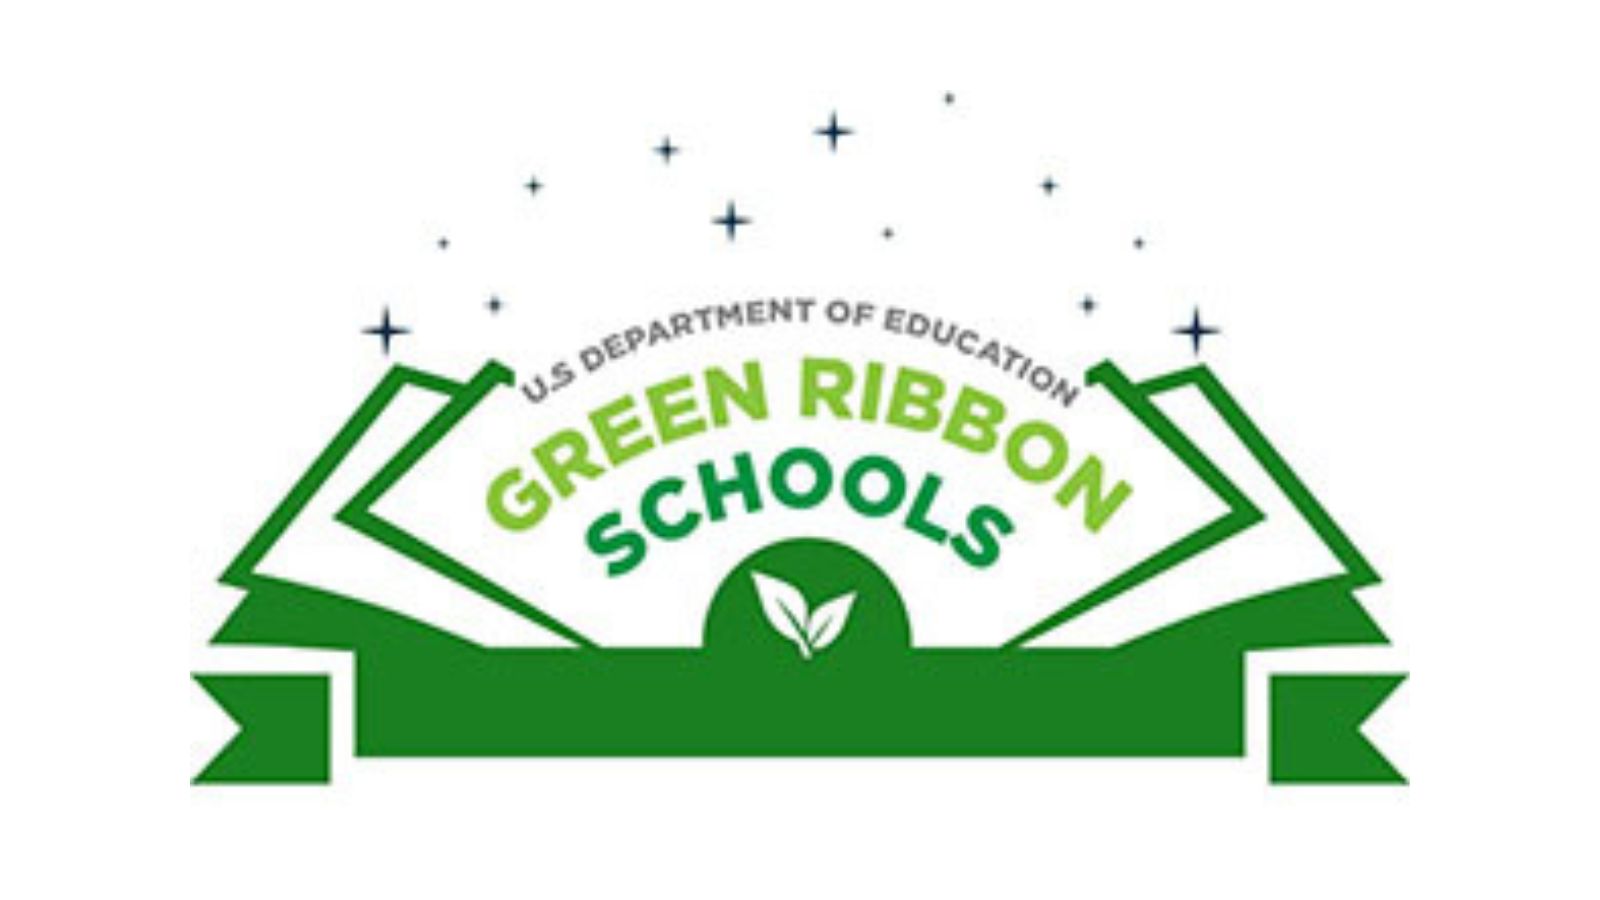 Green Ribbon Award given to six Wisconsin recipients from Dept. of Education